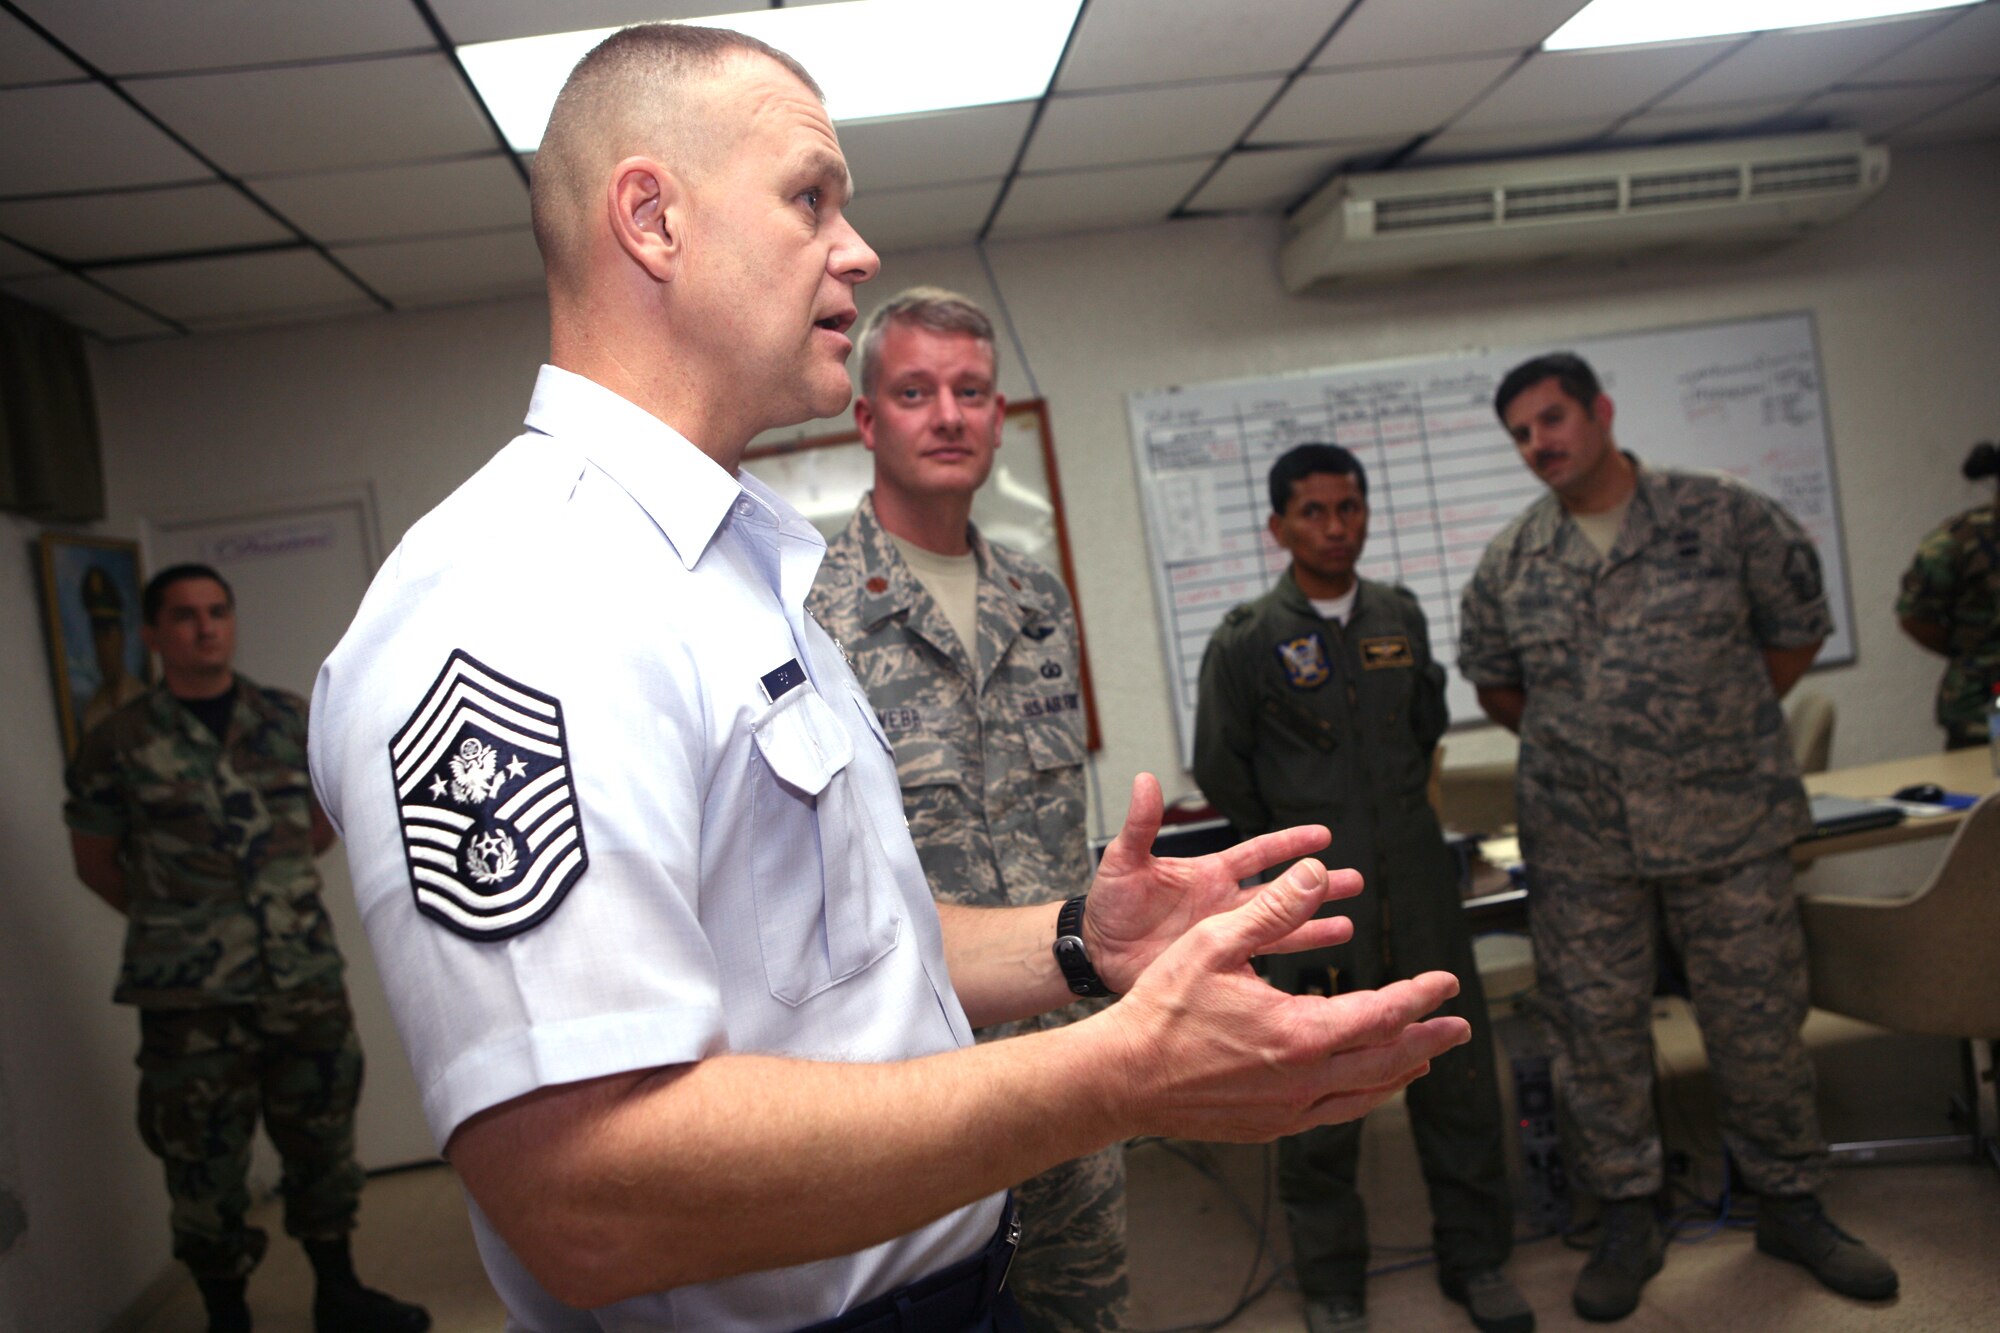 090919-N-4936C-152 Chief Master Sgt. of the Air Force James A. Roy speaks to Airmen of the 612th Air Expeditionary Communications Squadron and members of the Panamanian Air Service deployed to Capitan Juan Delgado Air Base in Panama City during Fuerzas Aliadas PANAMAX 2009. FA PANAMAX 2009 is a multinational exercise with 20 participating countries tailored to the defense of the Panama Canal, involving over 4,500 personnel from the U. S. Southern Command area of focus. U.S. Navy photo by Mass Communication Specialist 1st Class David P. Coleman (Released)
